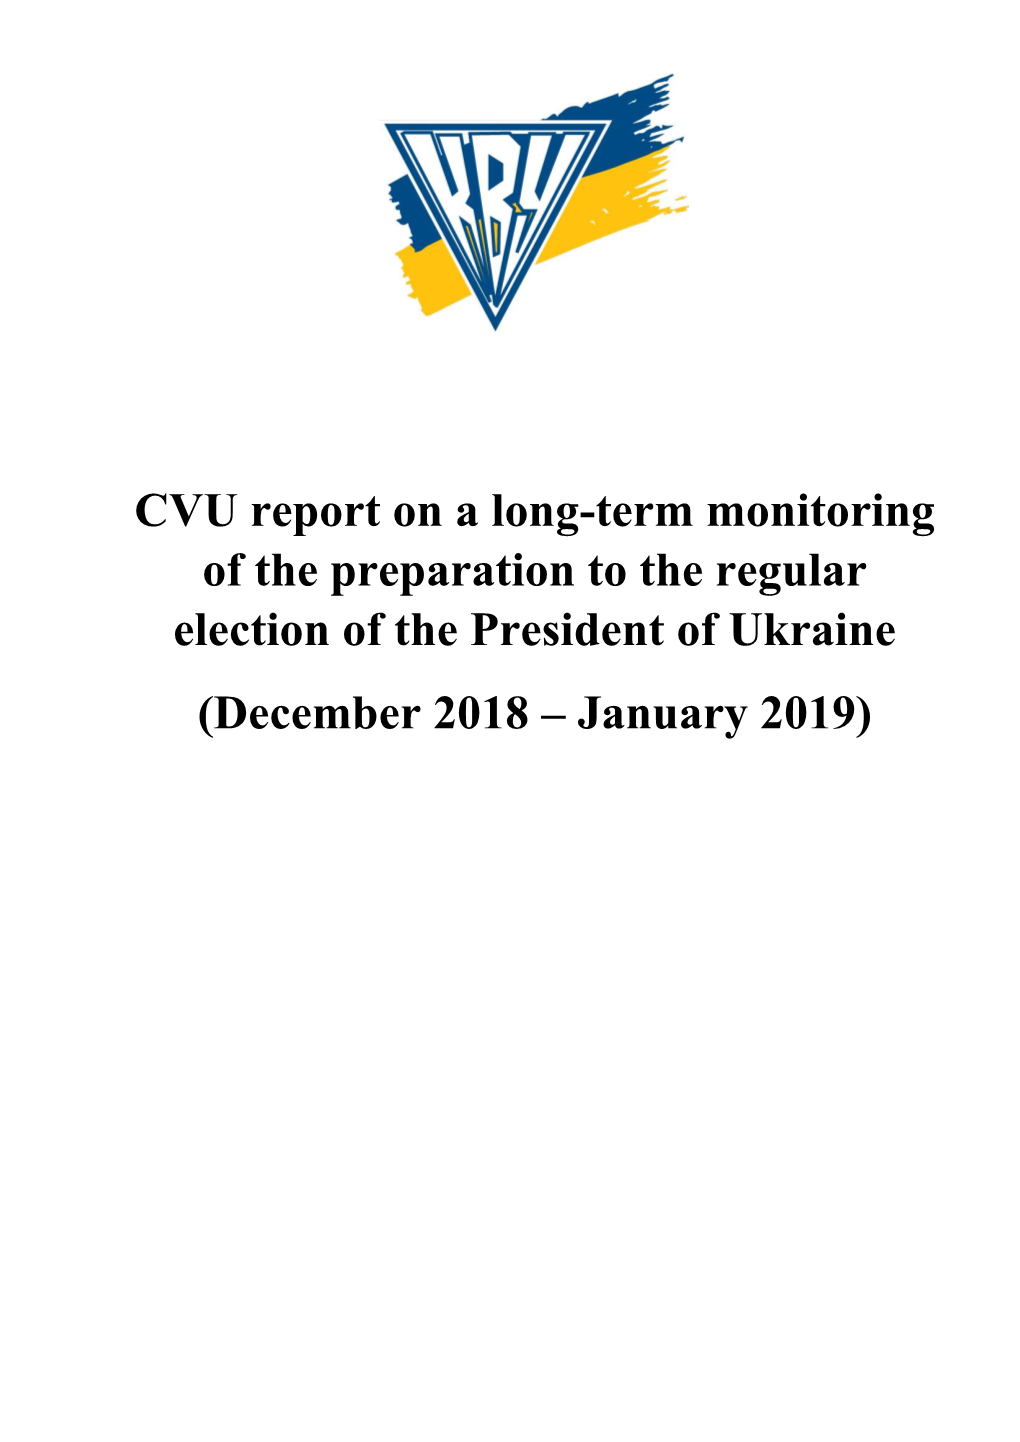 CVU Report on a Long-Term Monitoring of the Preparation to the Regular Election of the President of Ukraine (December 2018 – January 2019)